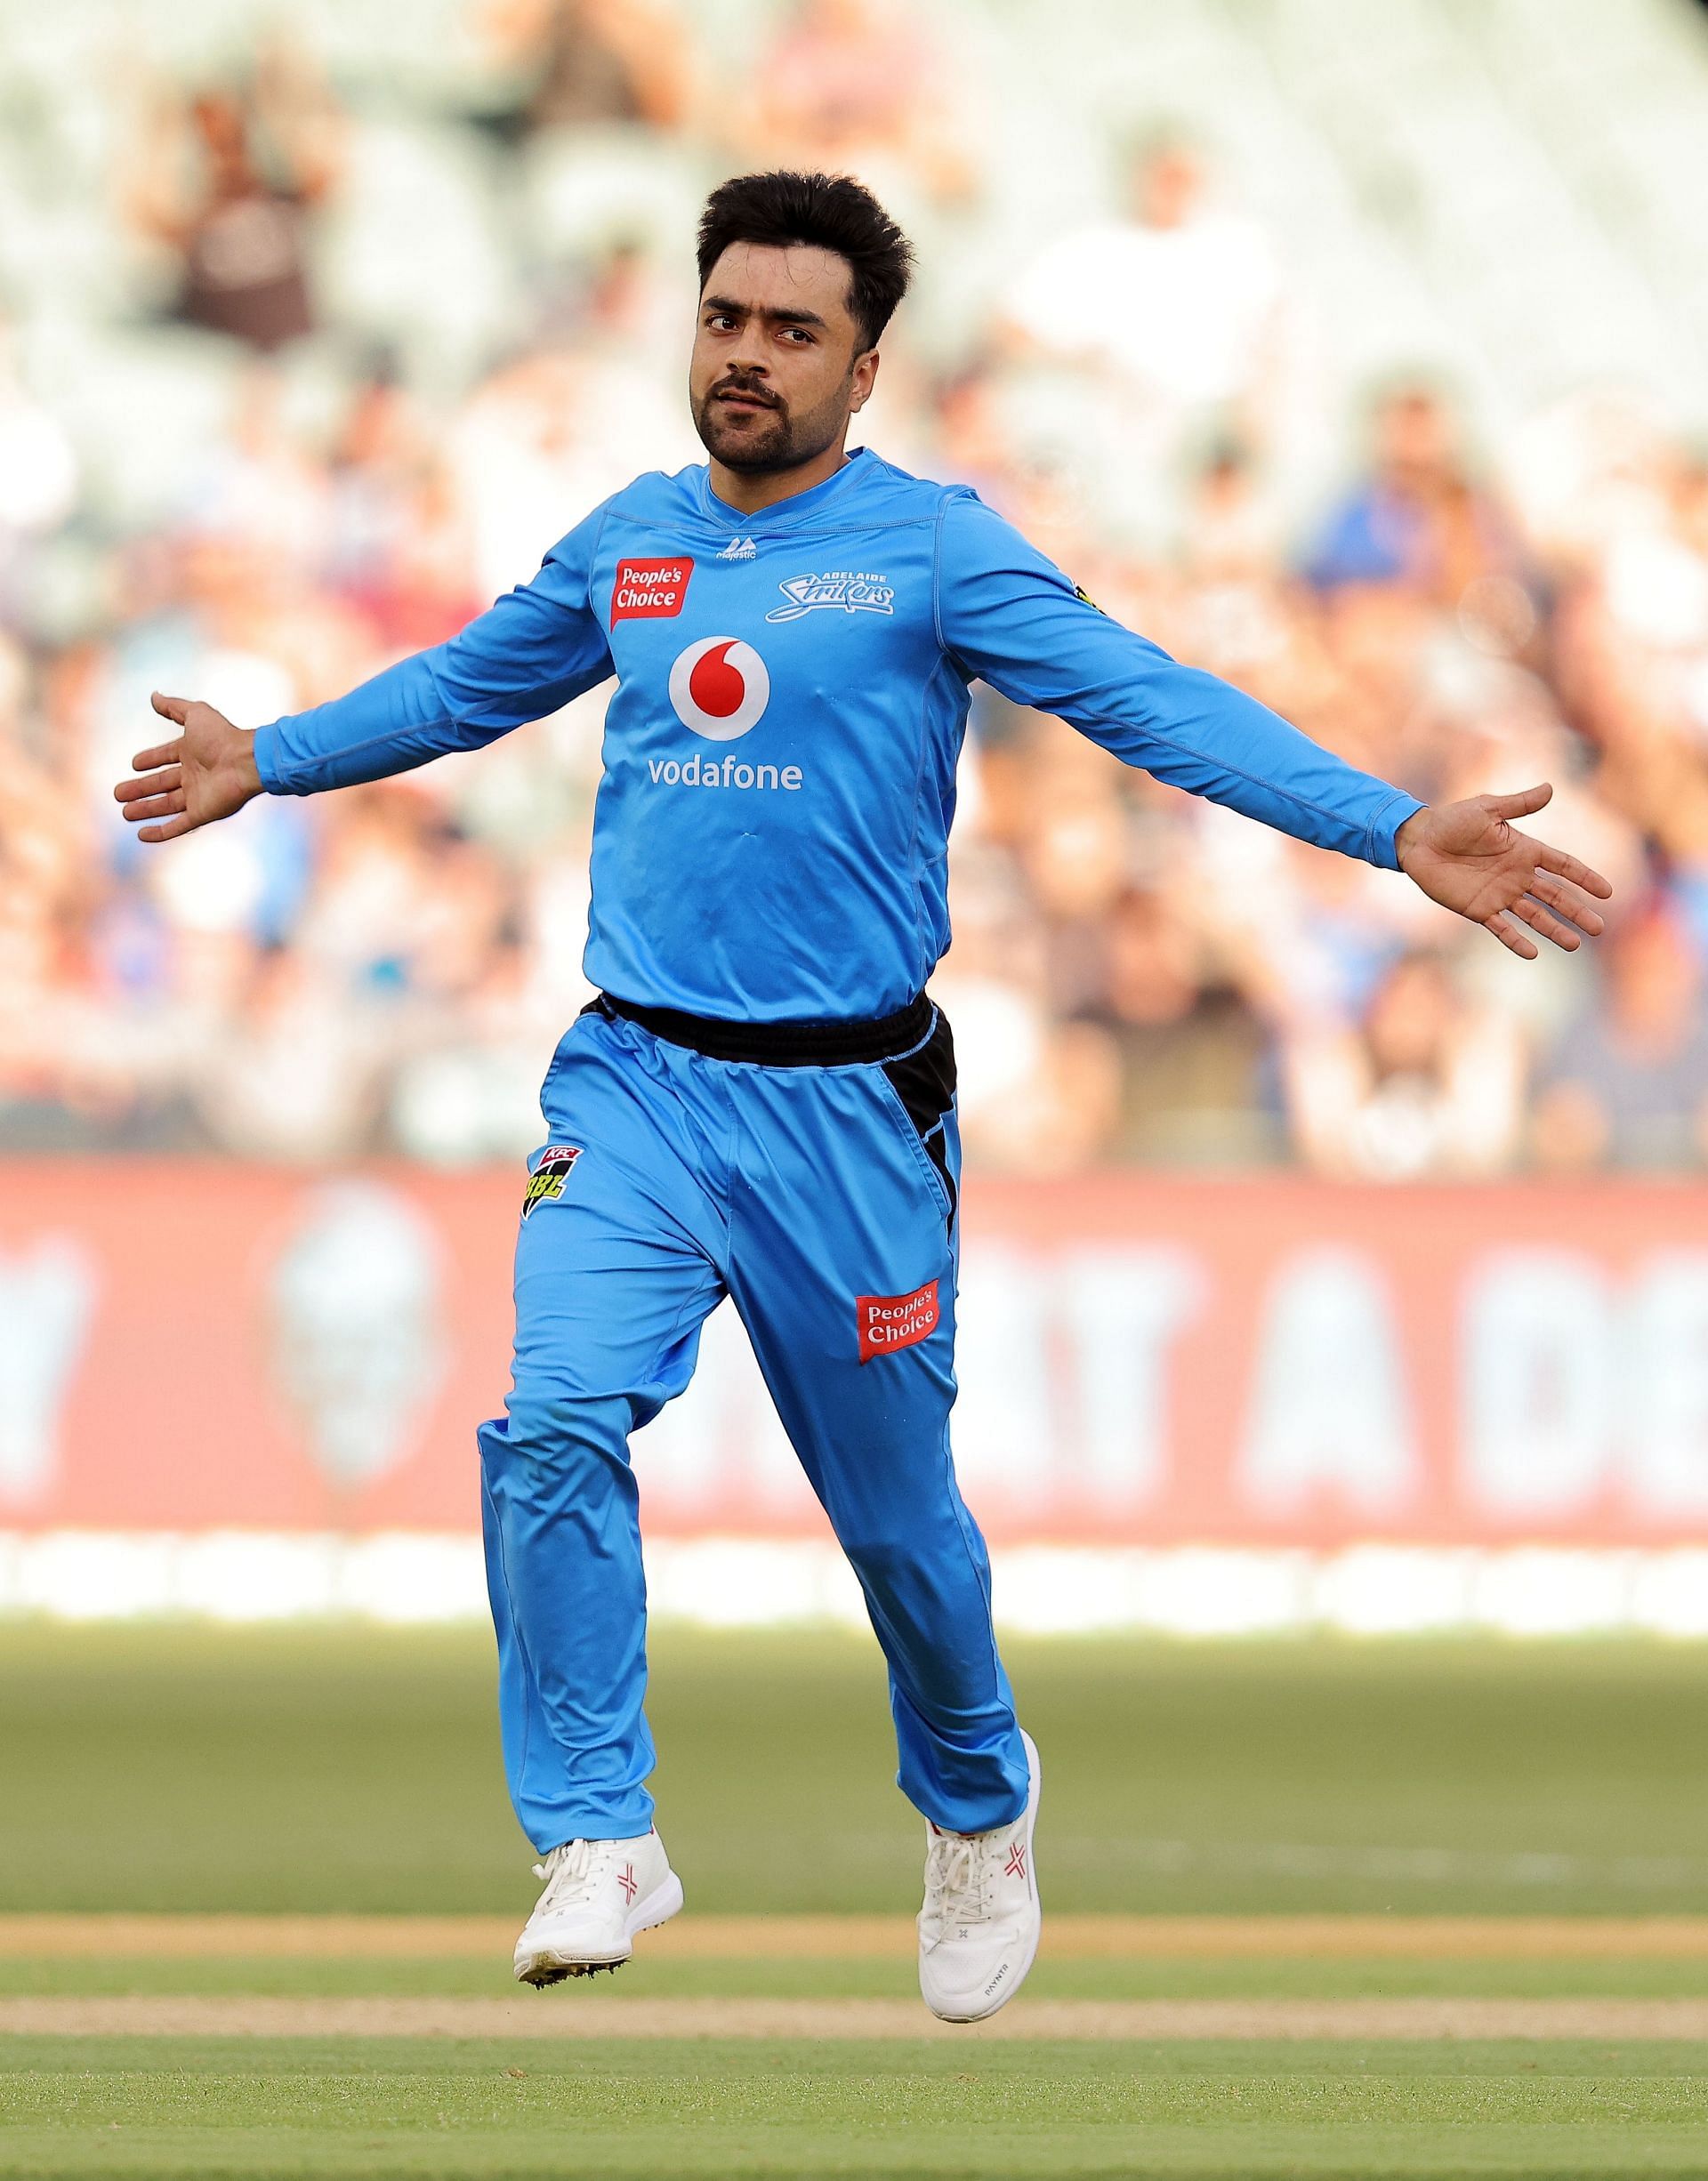 Rashid Khan looks set to turn out for a new team come IPL 2022.